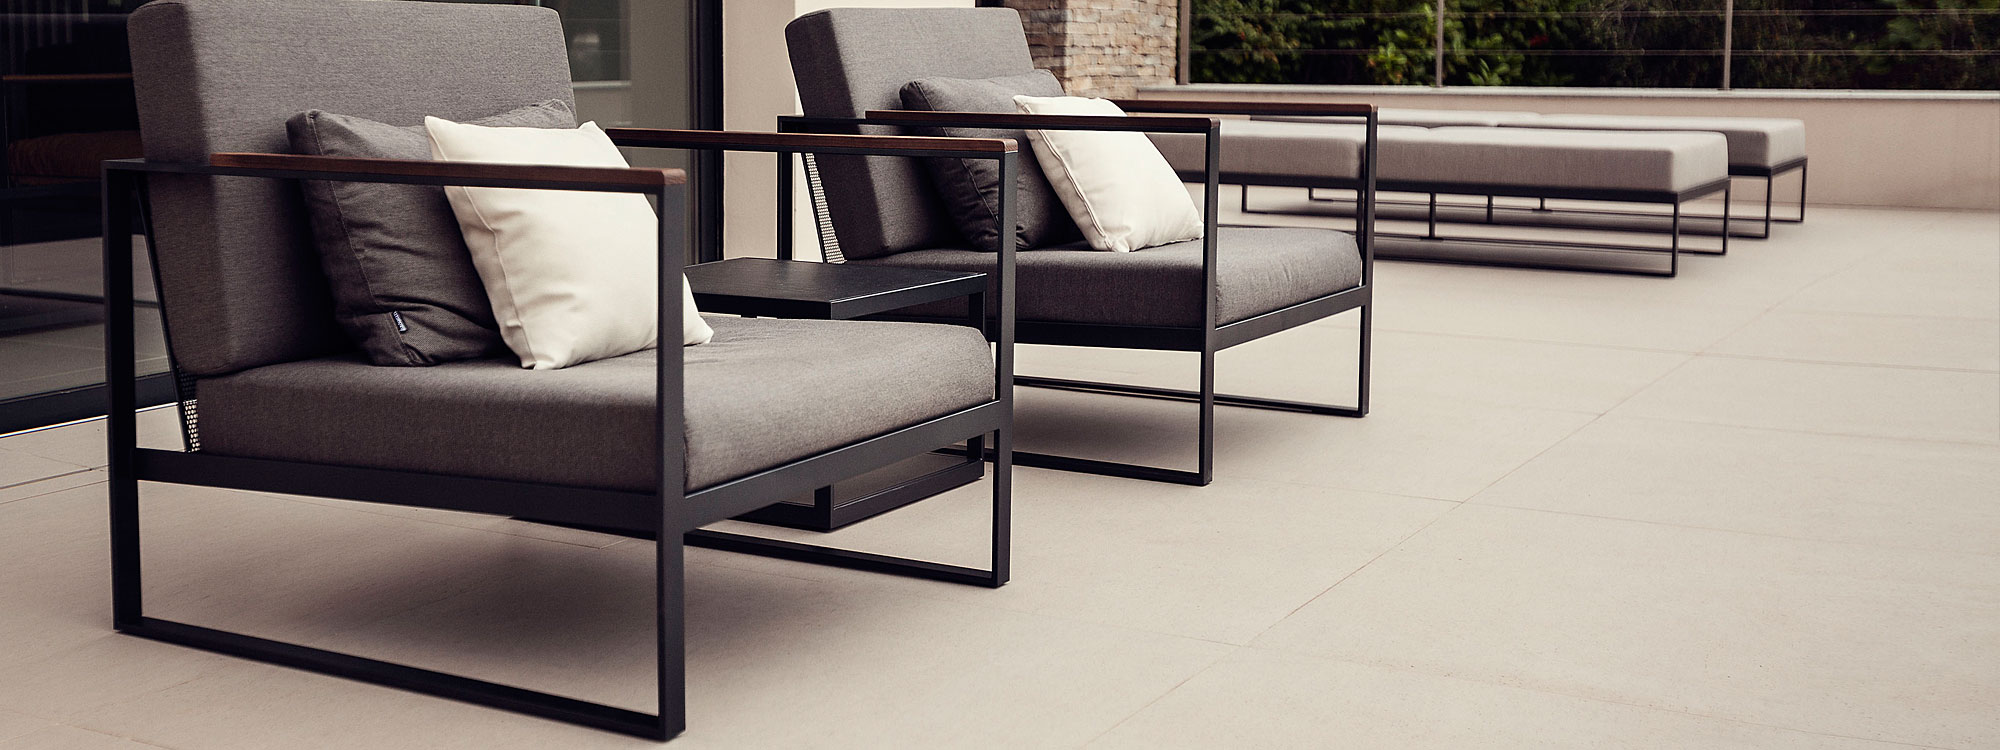 Image of pair of Roshults Garden Easy lounge chairs and daybeds on sleek terrace